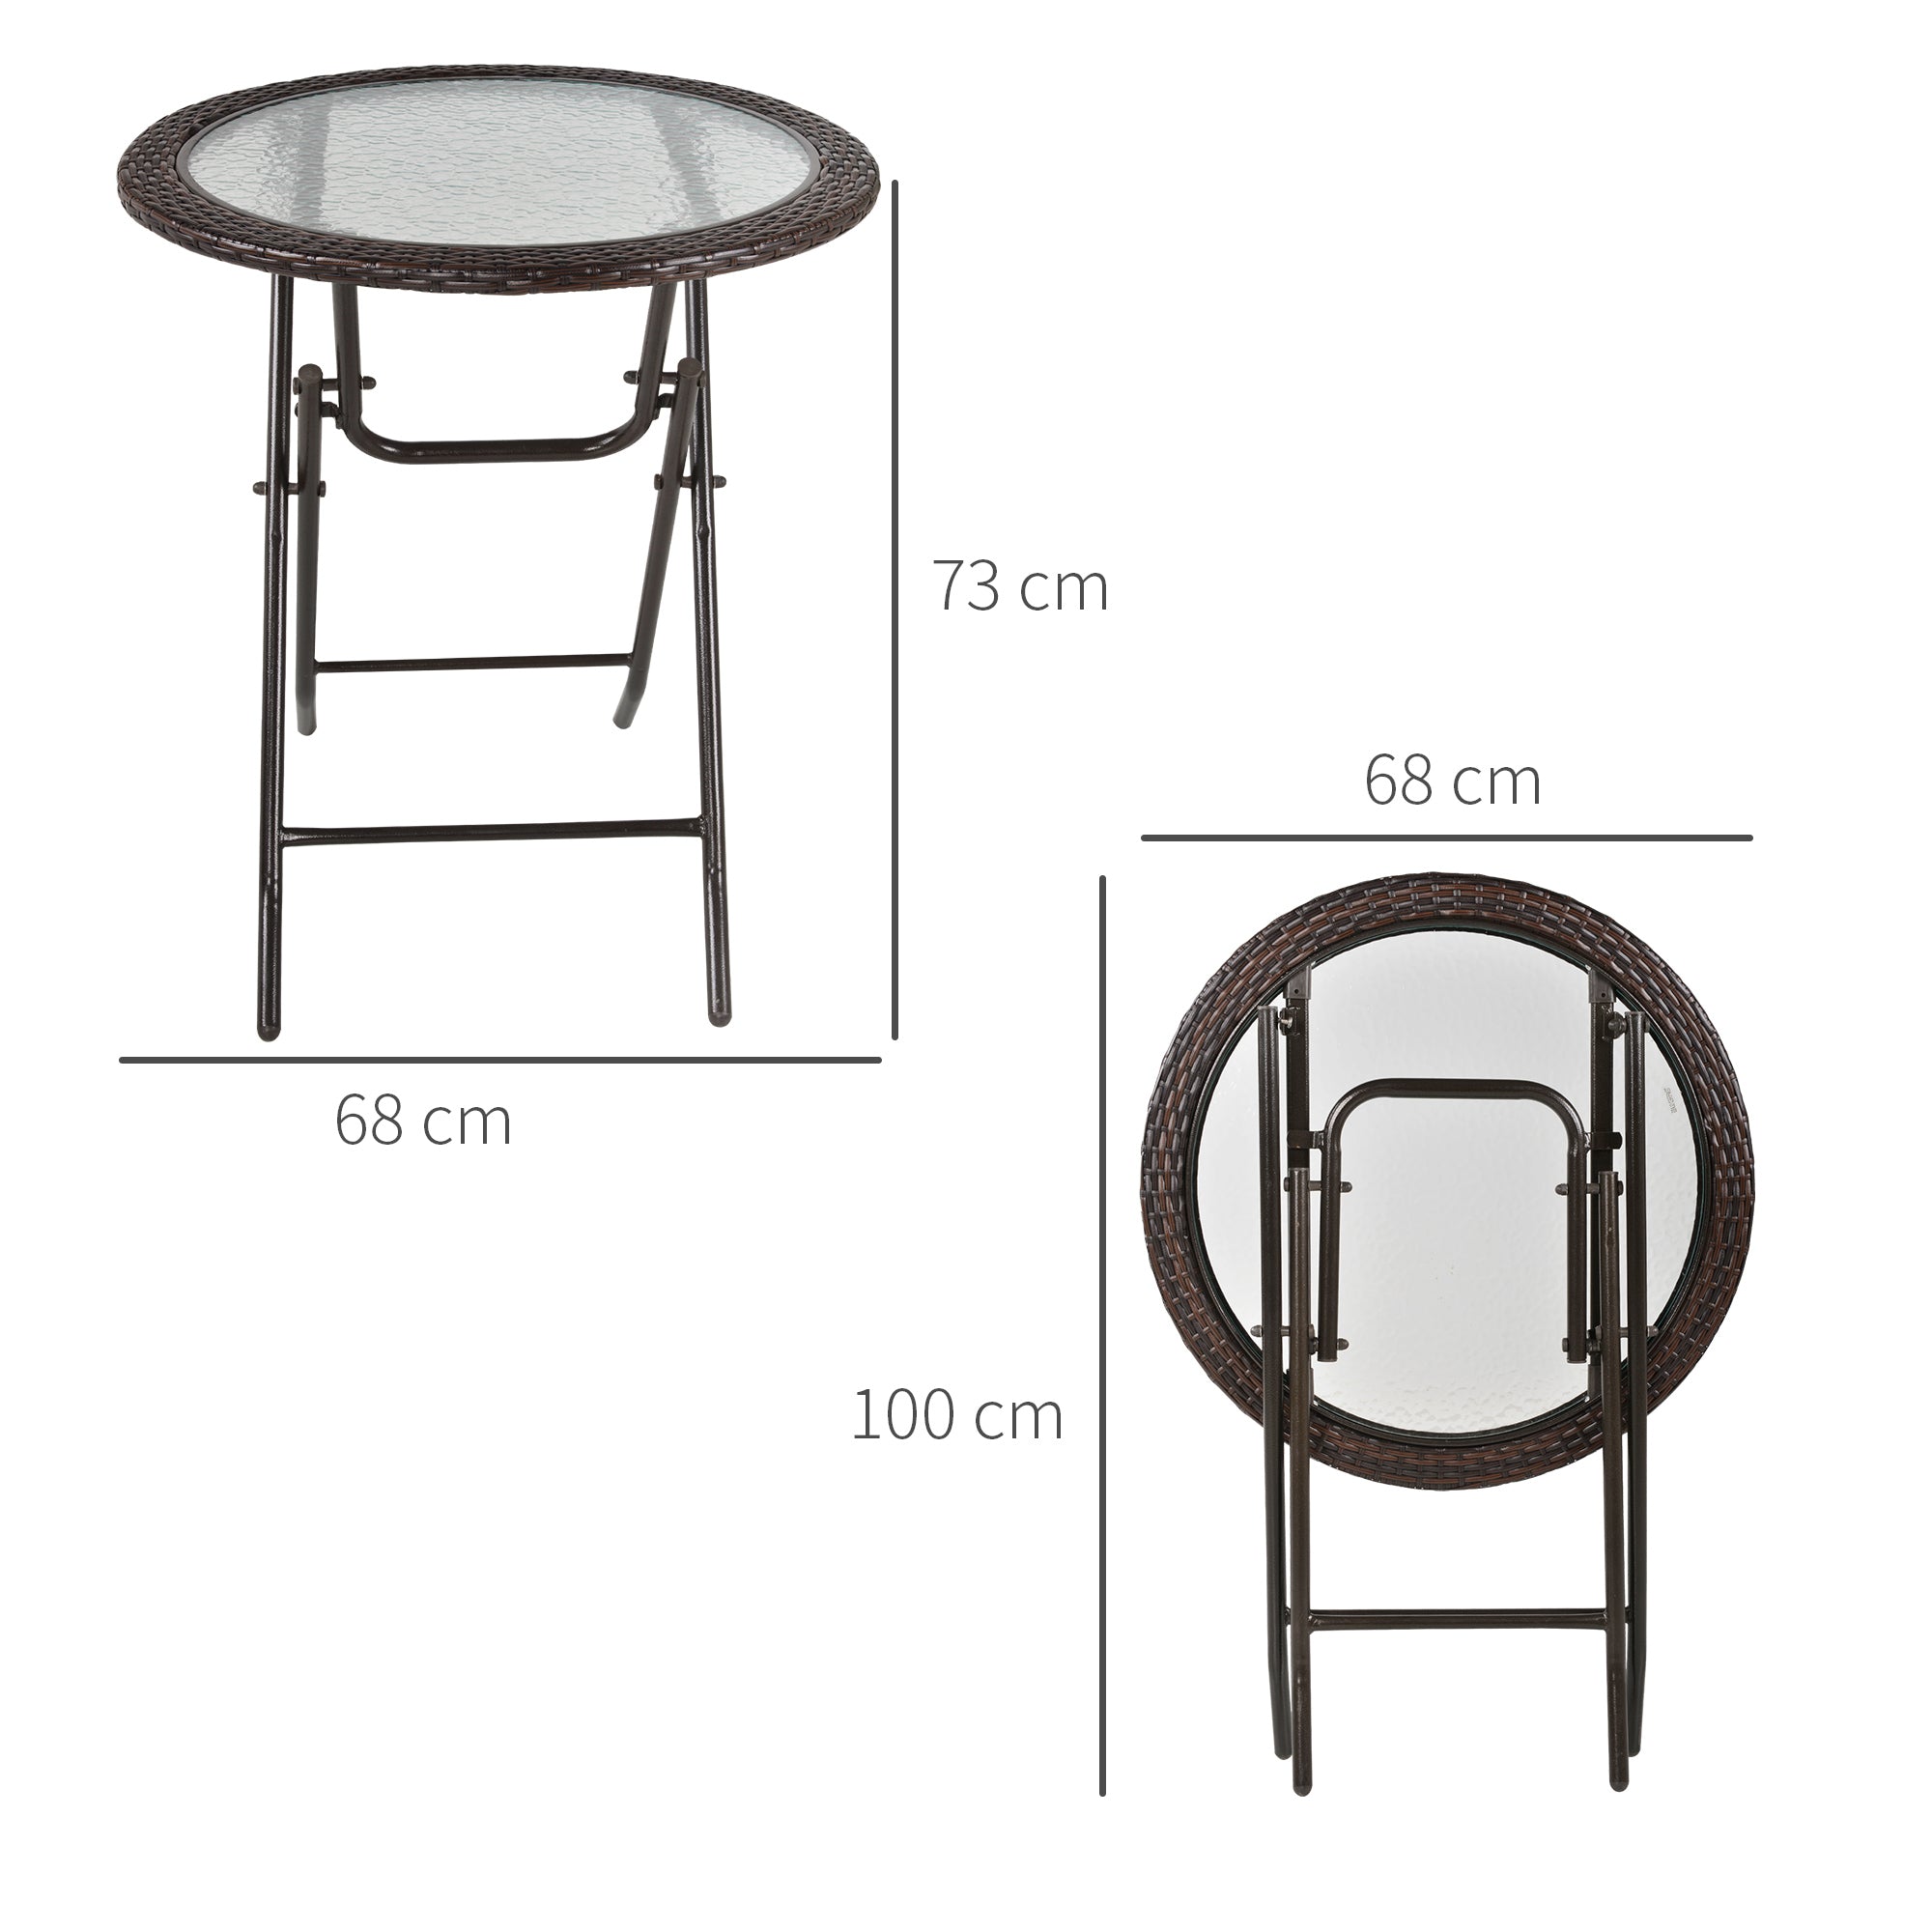 Folding Round Tempered Glass Metal Table with Brown Rattan Edging-2